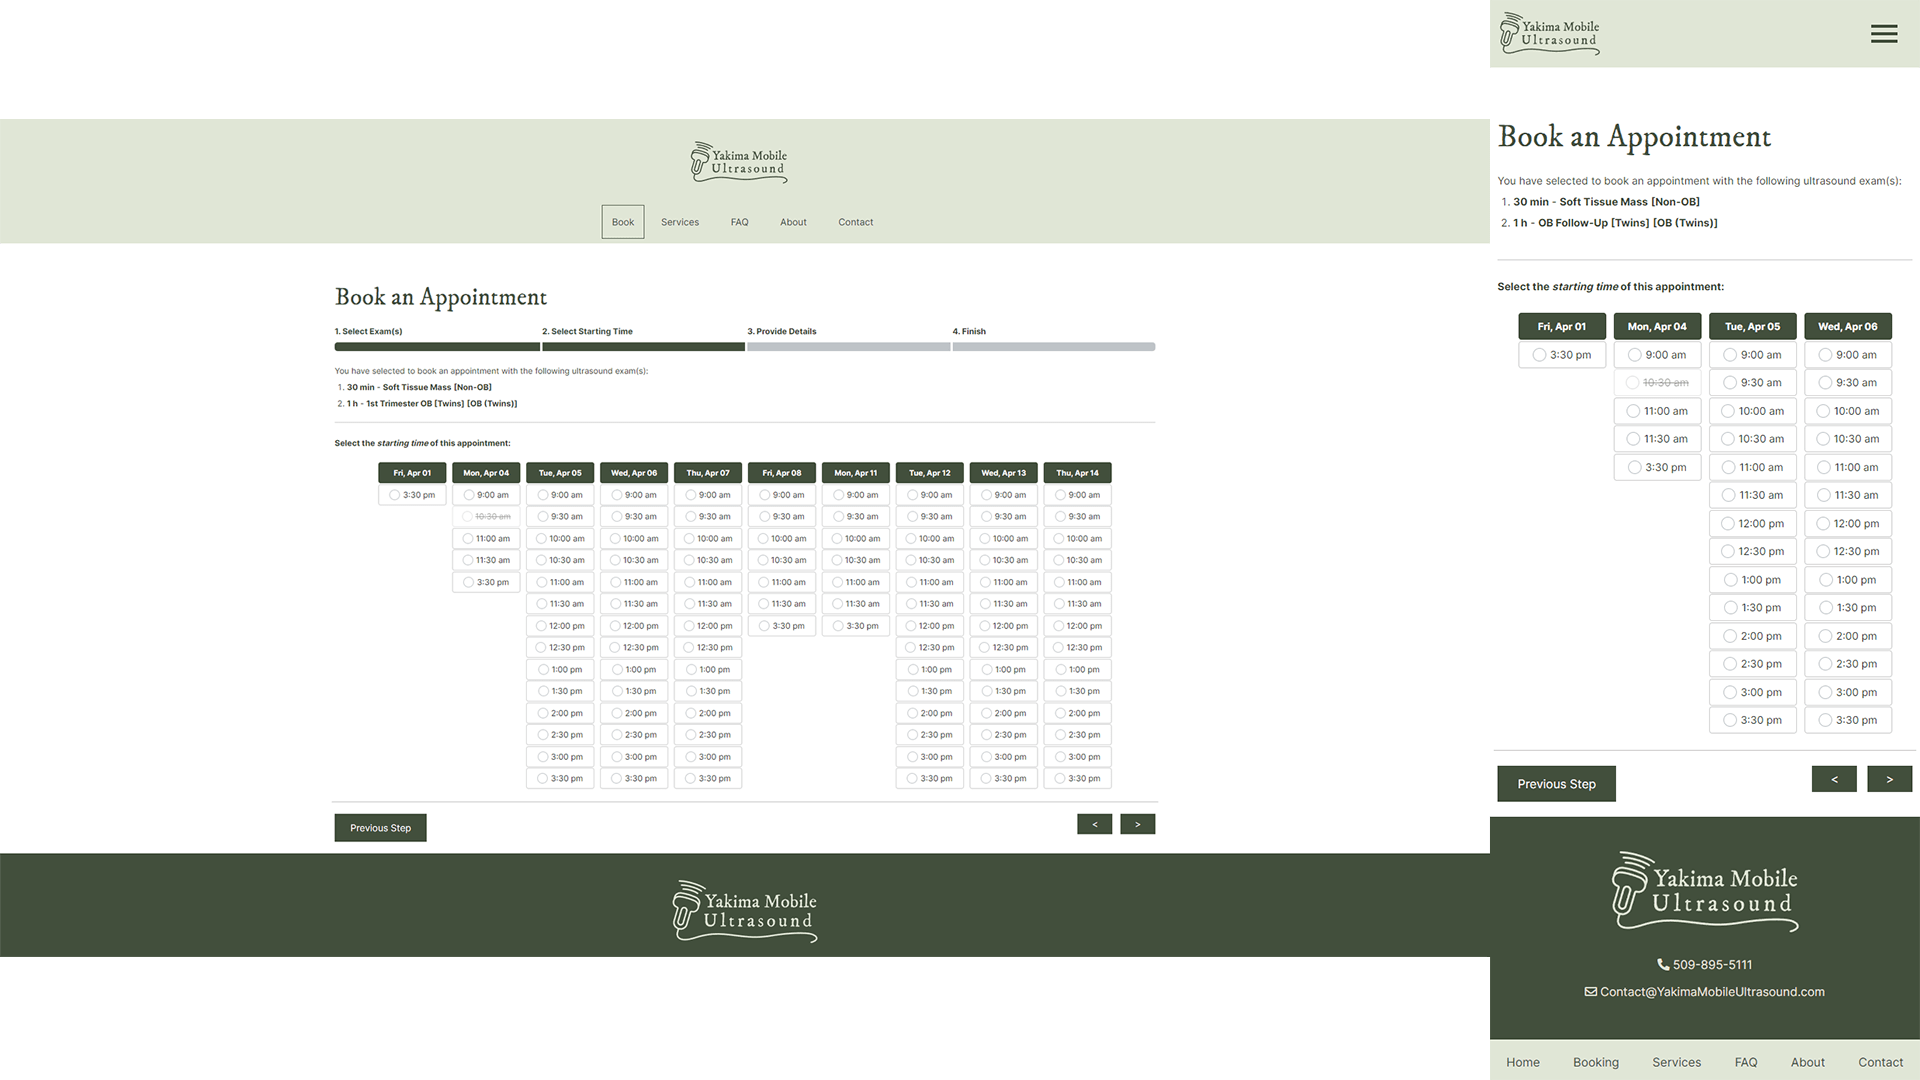 JDM of Washington – Desktop and mobile device screenshots of the appointment scheduling webpage